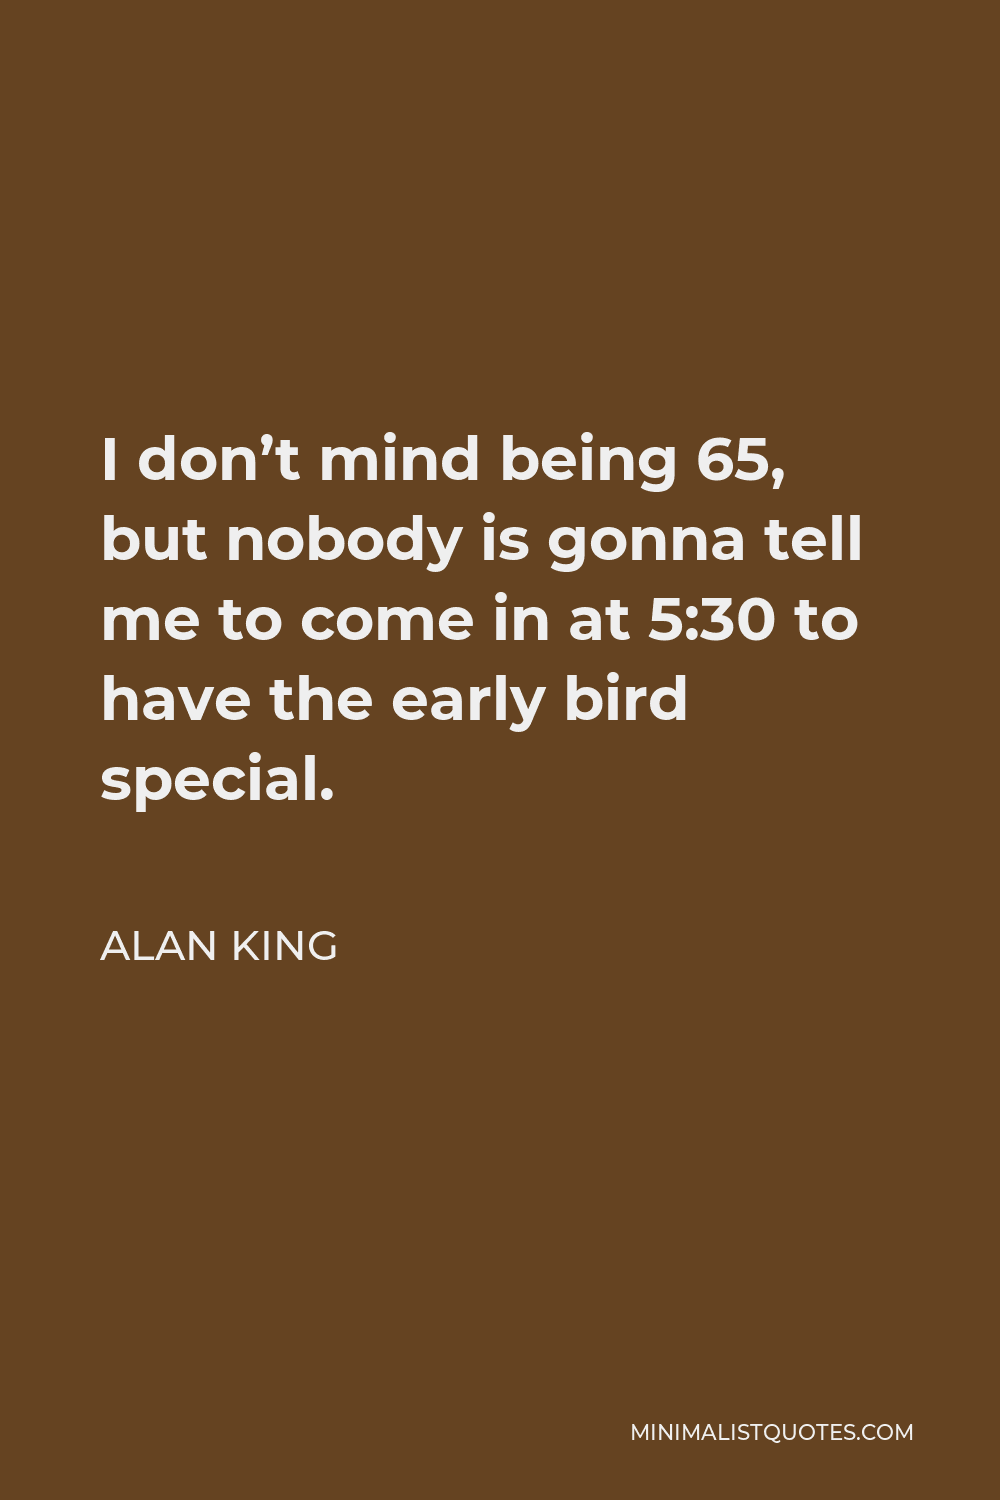 Alan King Quote - I don’t mind being 65, but nobody is gonna tell me to come in at 5:30 to have the early bird special.